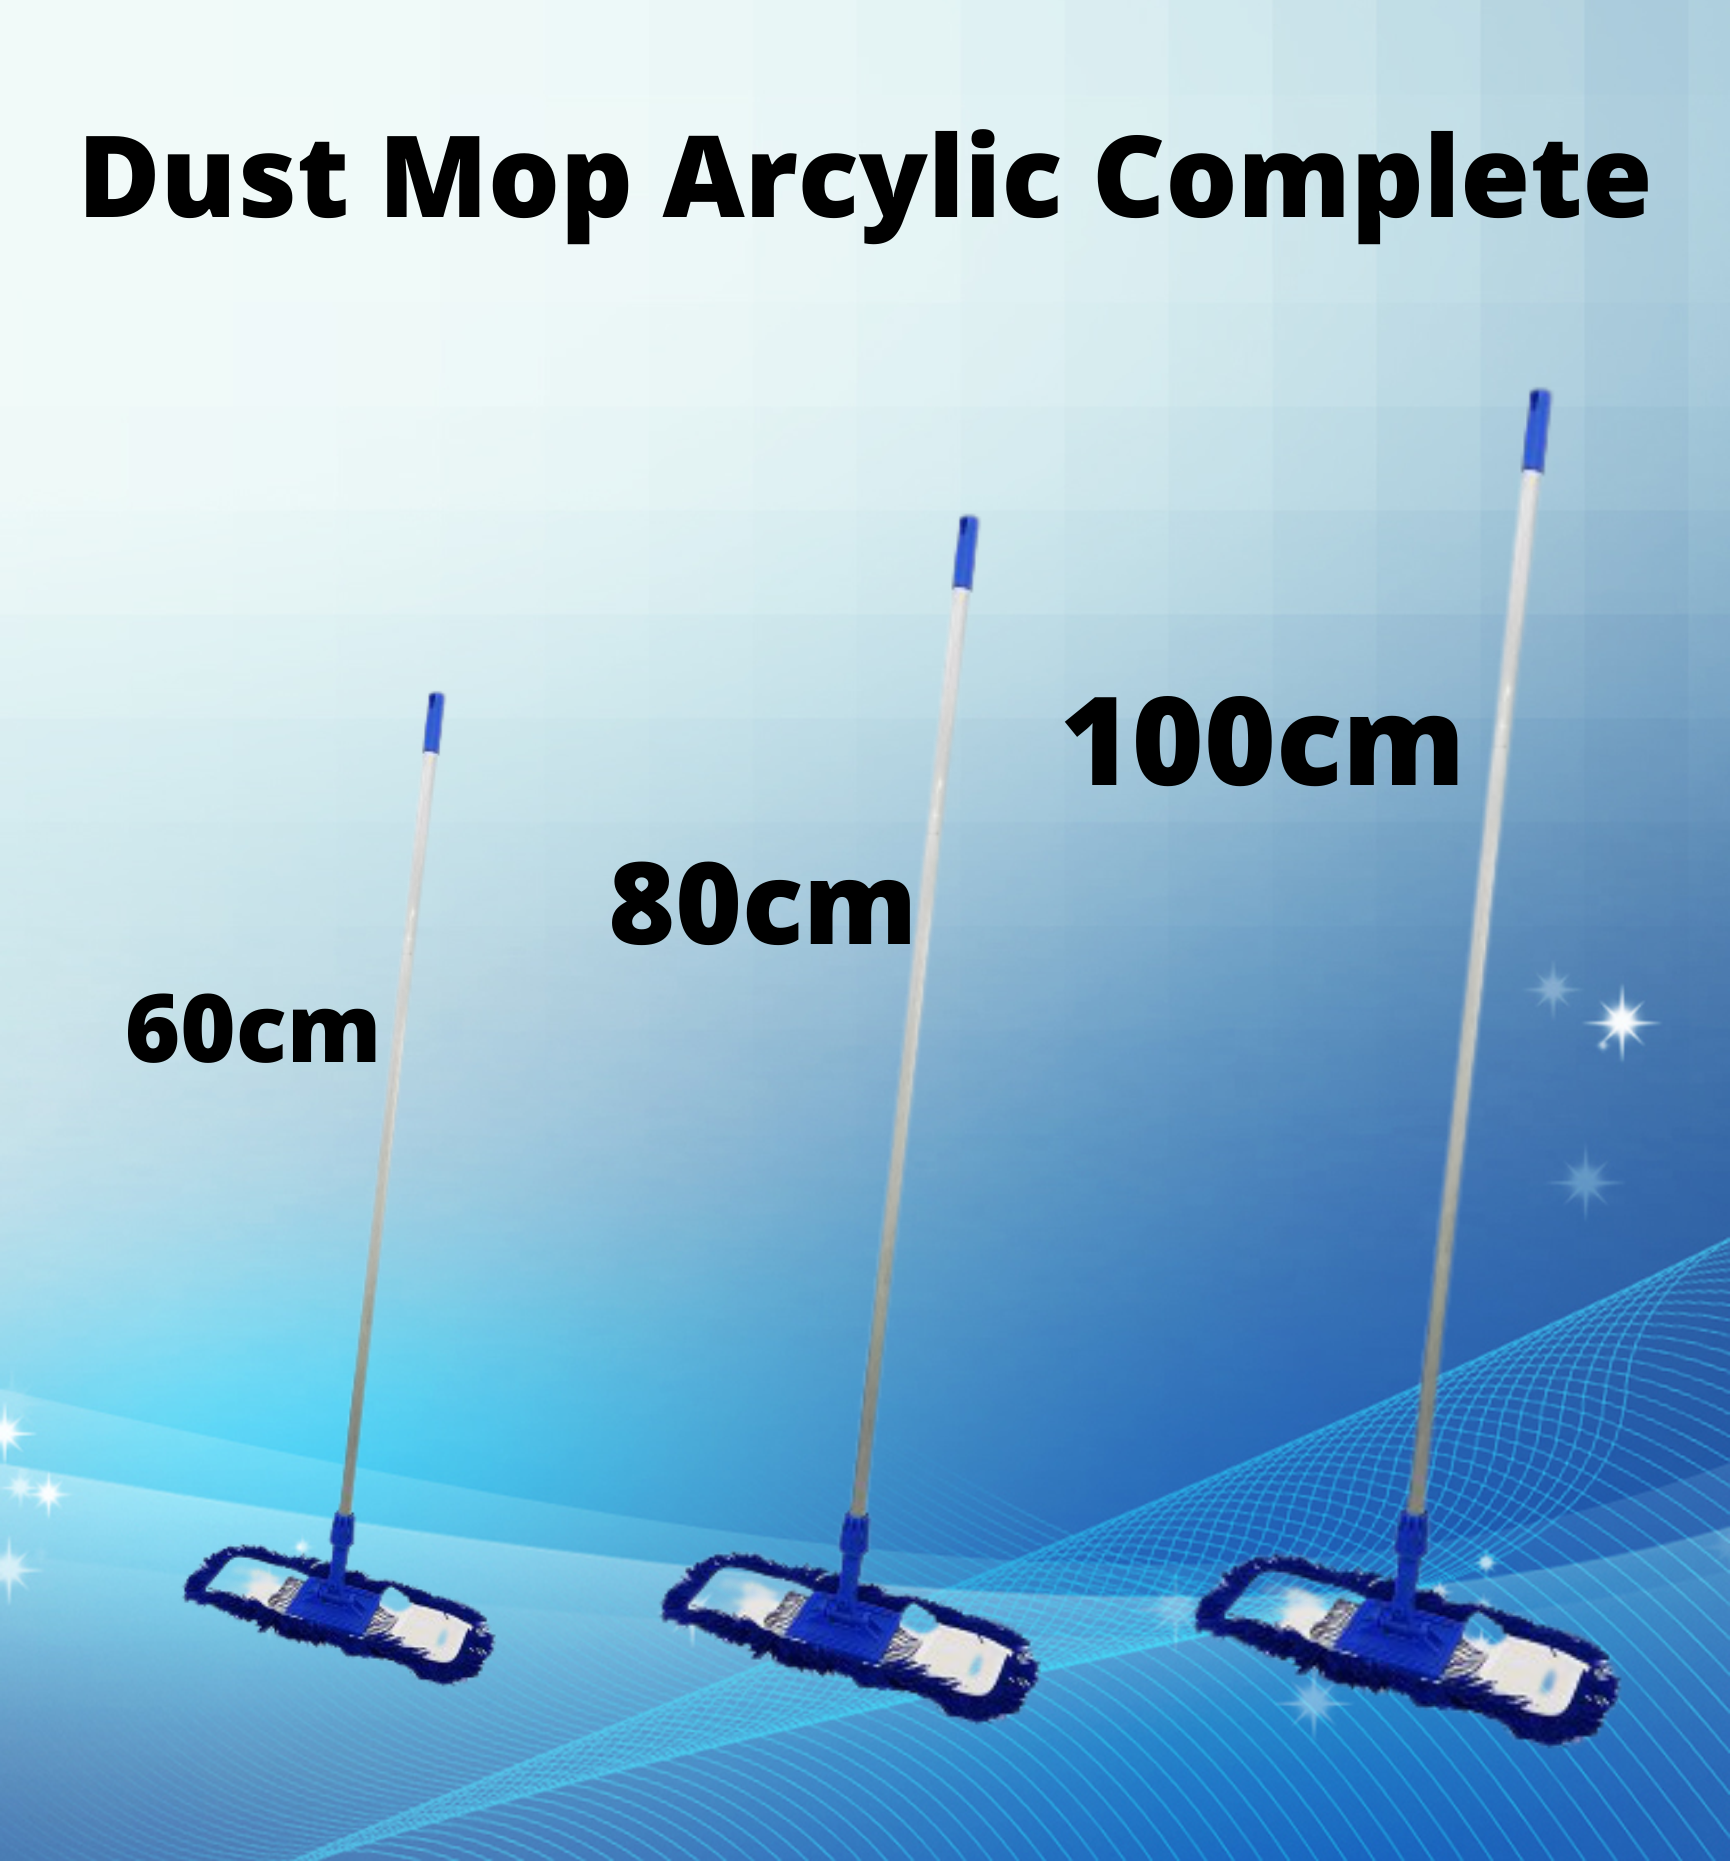 Dust-Mop-Arcylic-Complete.png